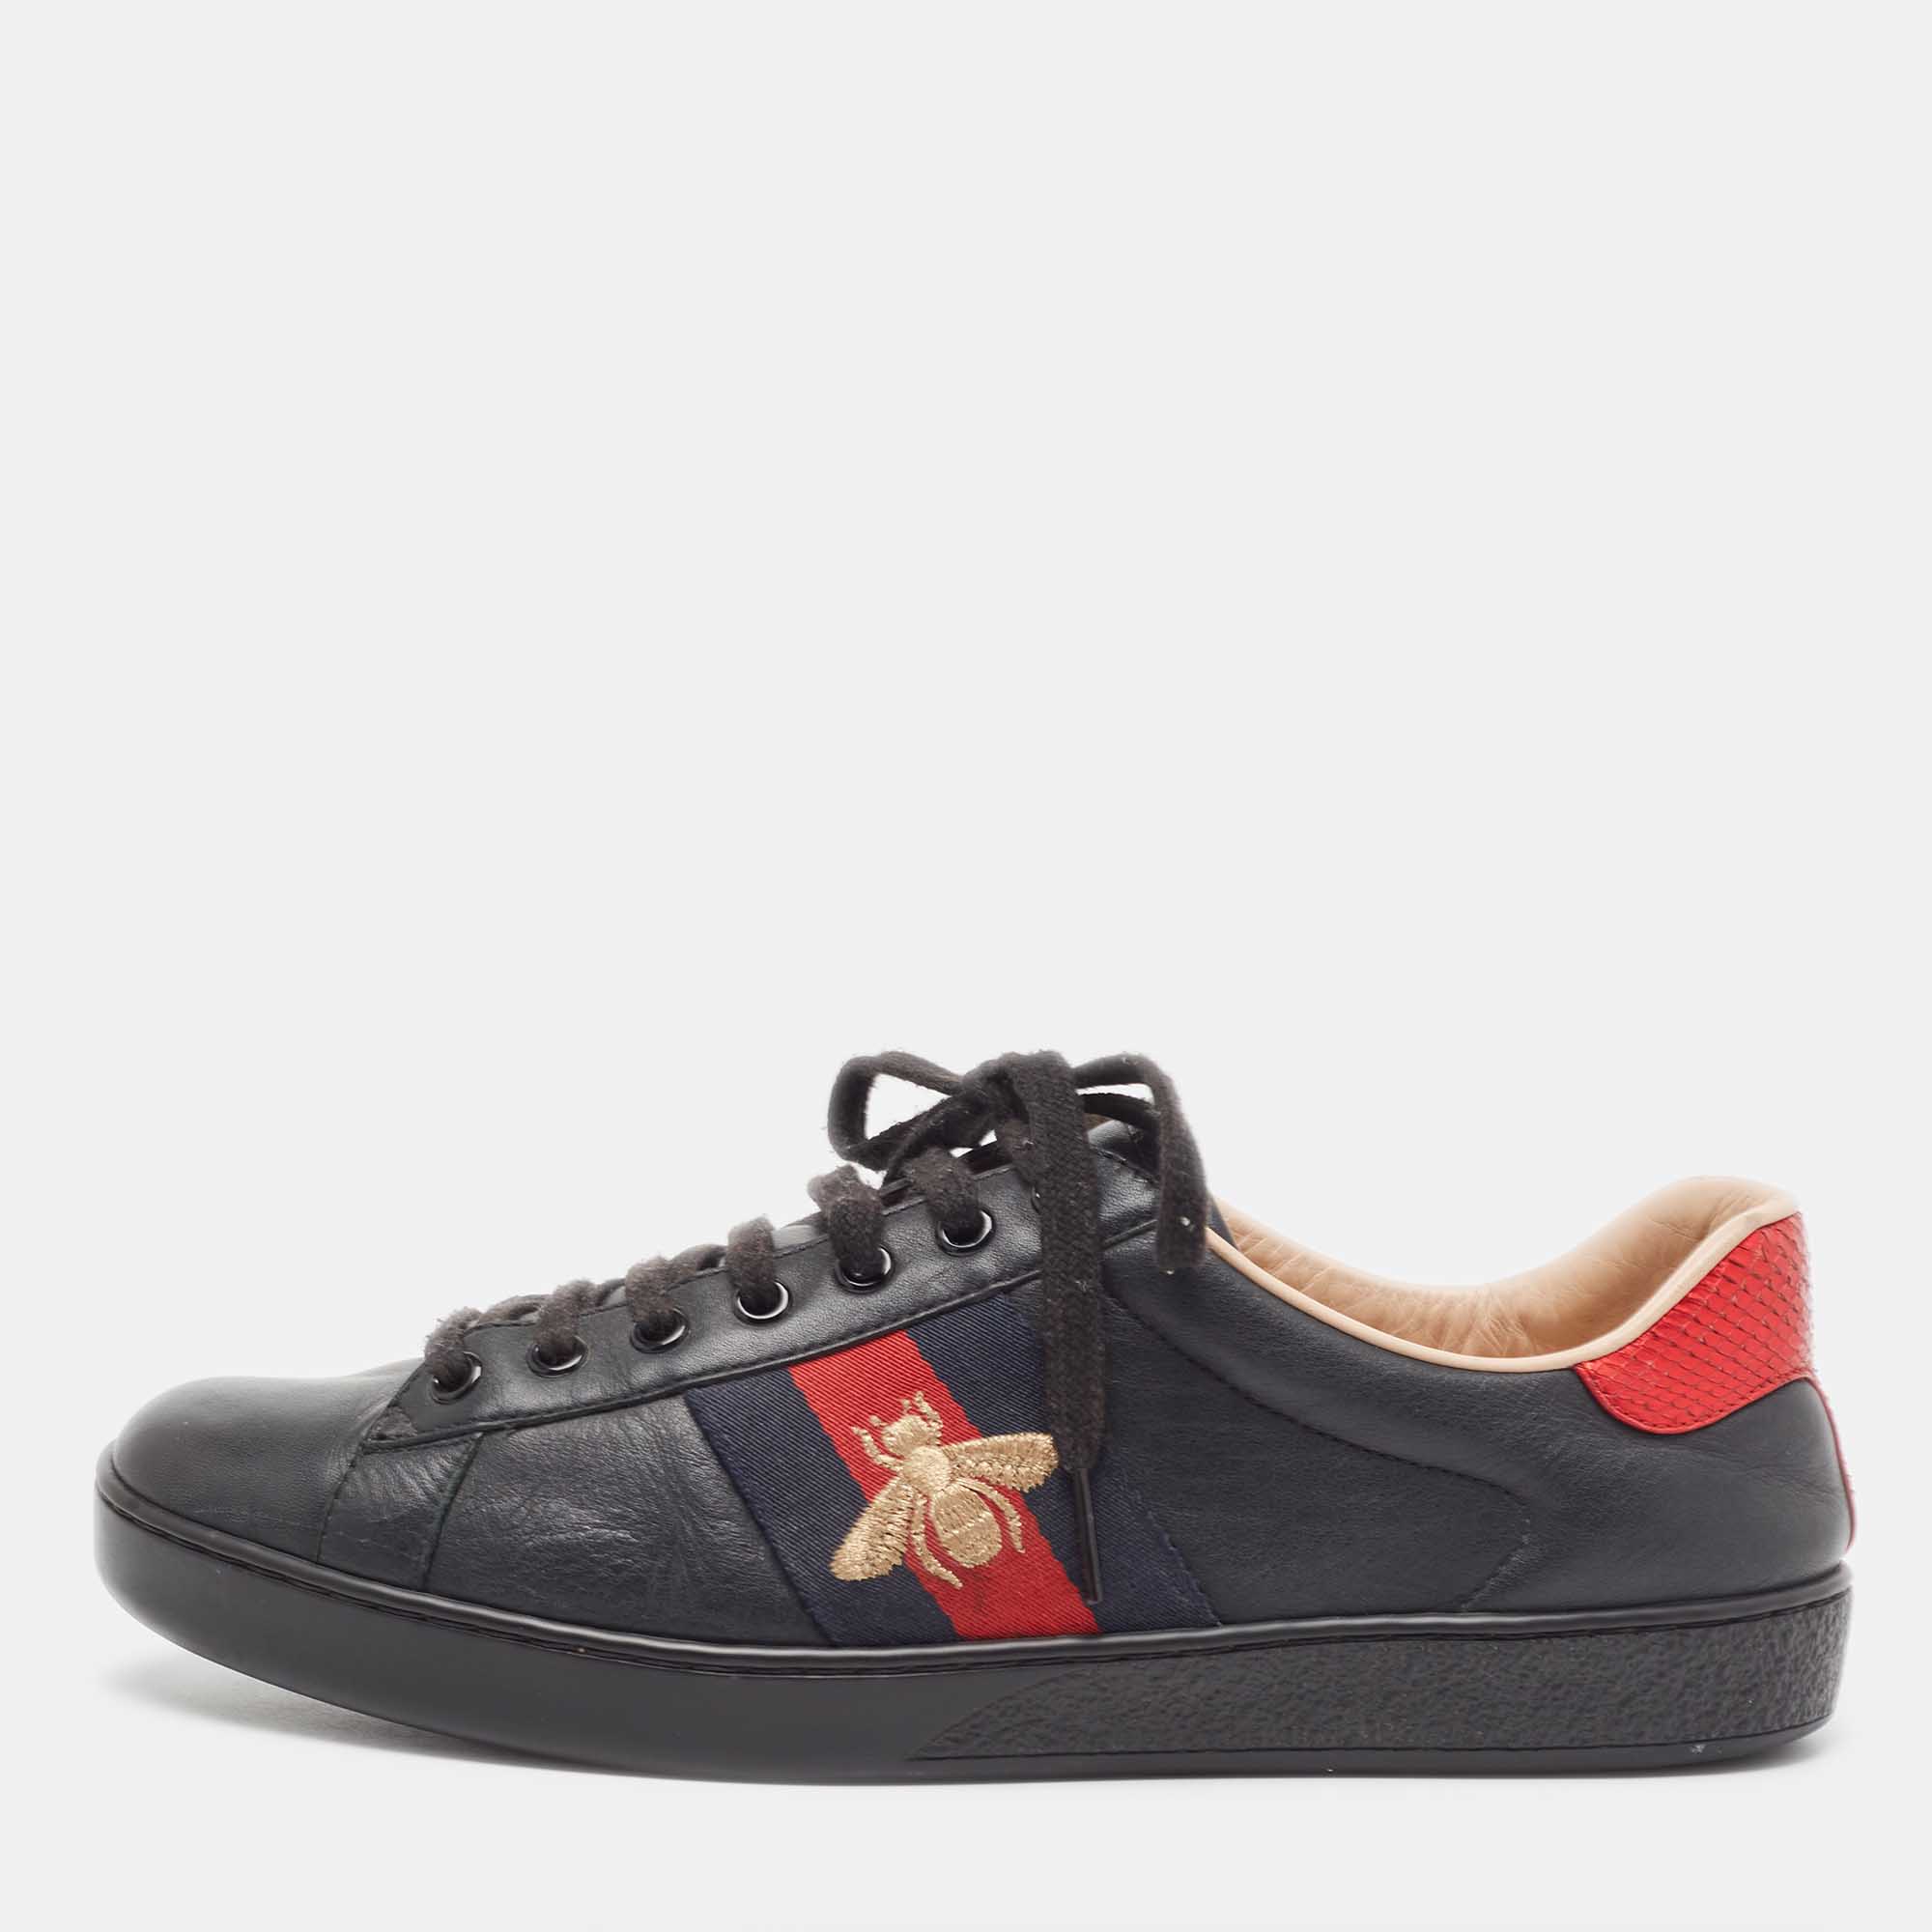 

Gucci Black Leather Embroidered Bee Ace Sneakers Size